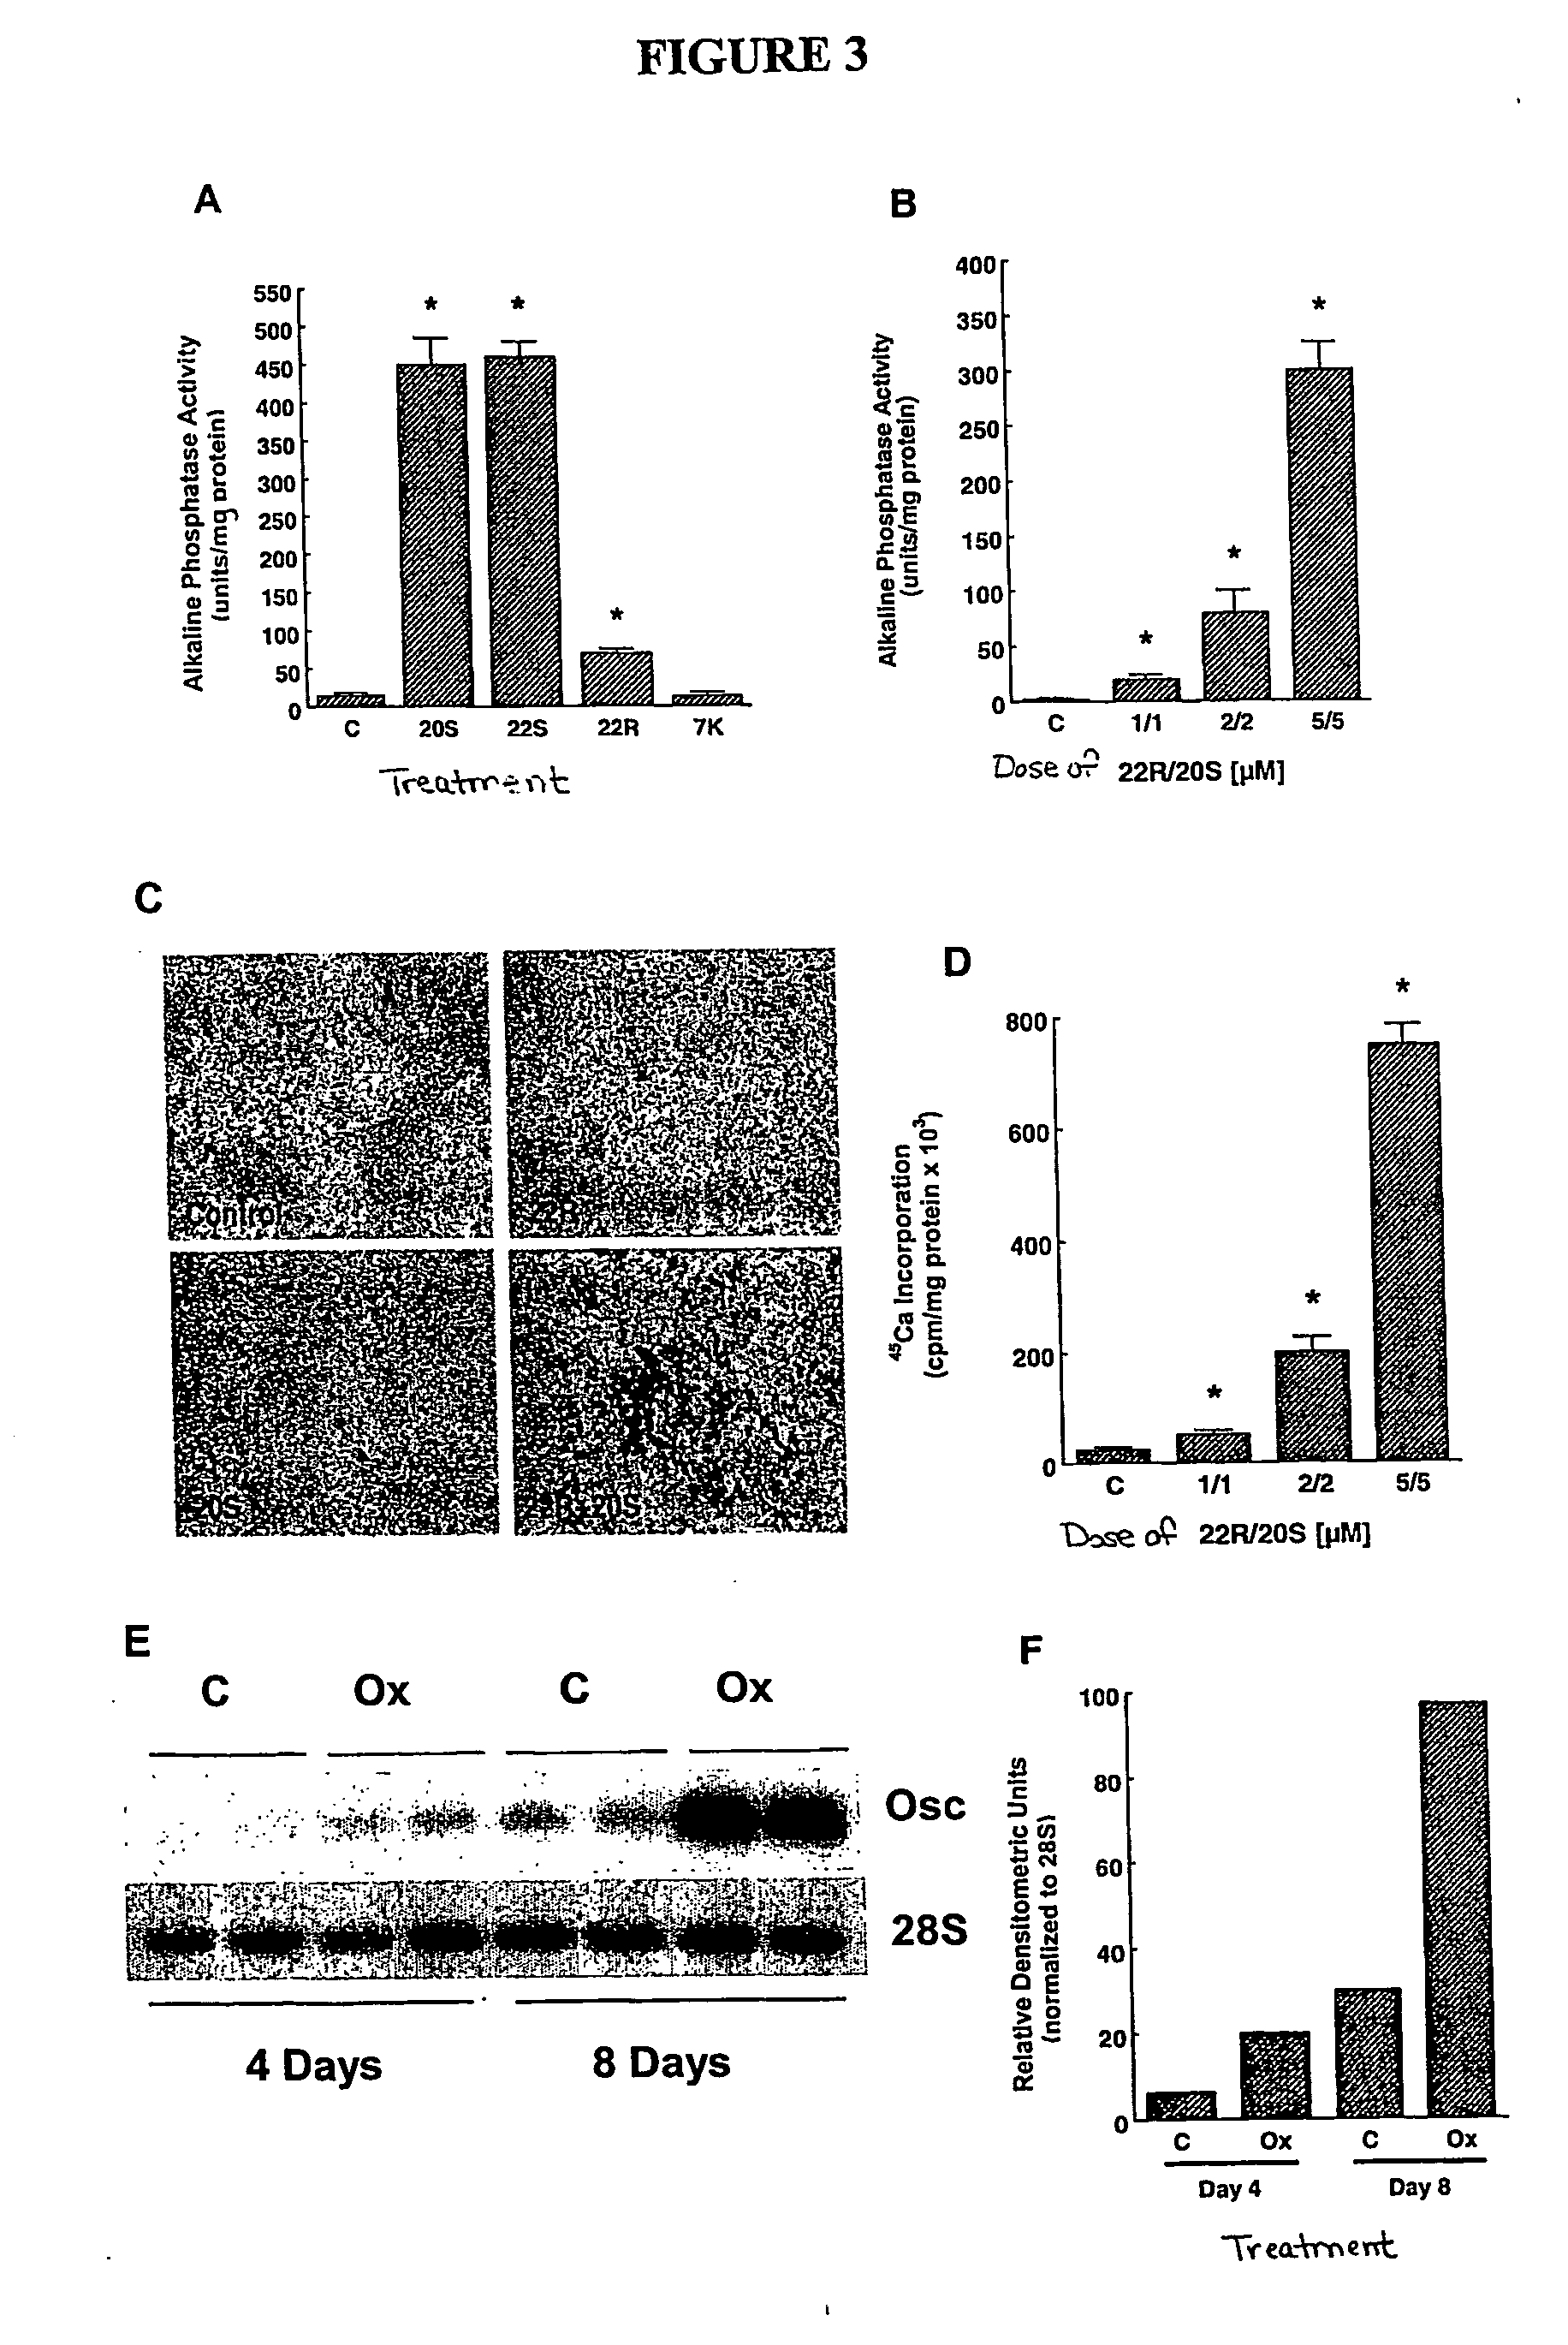 Agents and methods for enhancing bone formation by oxysterols in combination with bone morphogenic proteins